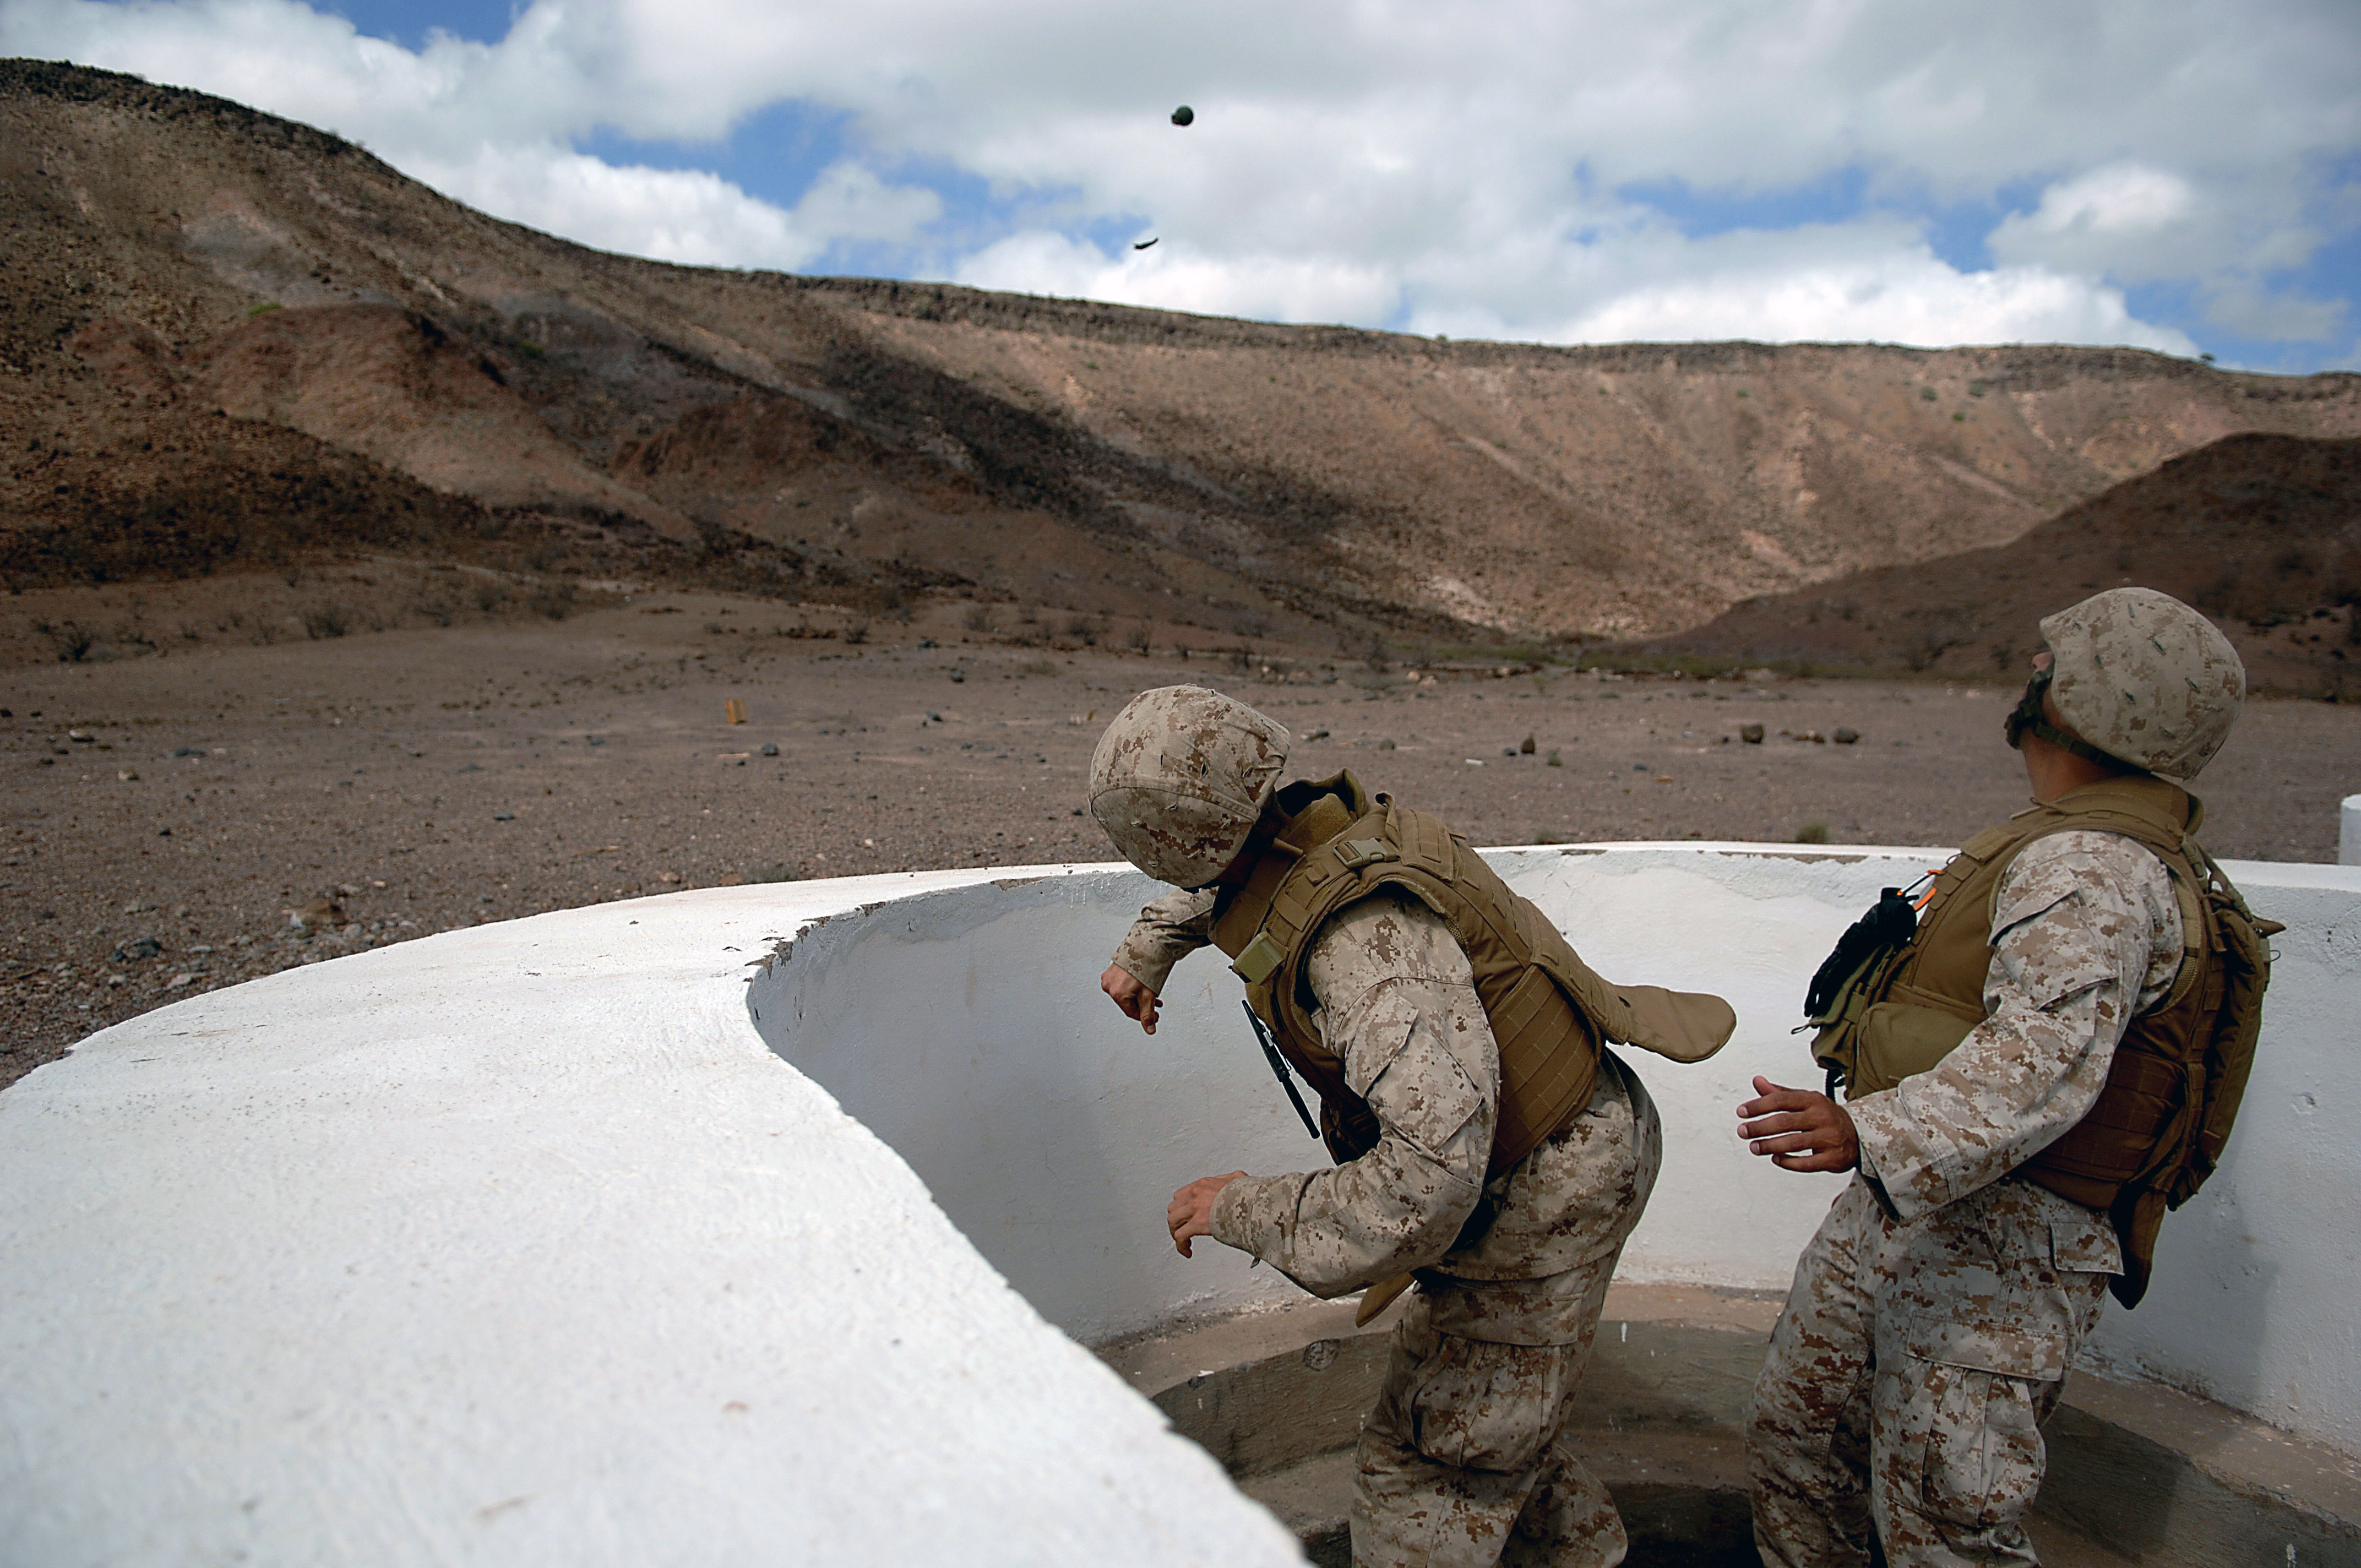 US_Navy_080123-F-1644L-044_A_Marine_assigned_to_the_3rd_Low_Altitude_Air_Defense_Battalion%2C_throws_a_M-67_Fragment_Grenade_at_the_firing_range.jpg